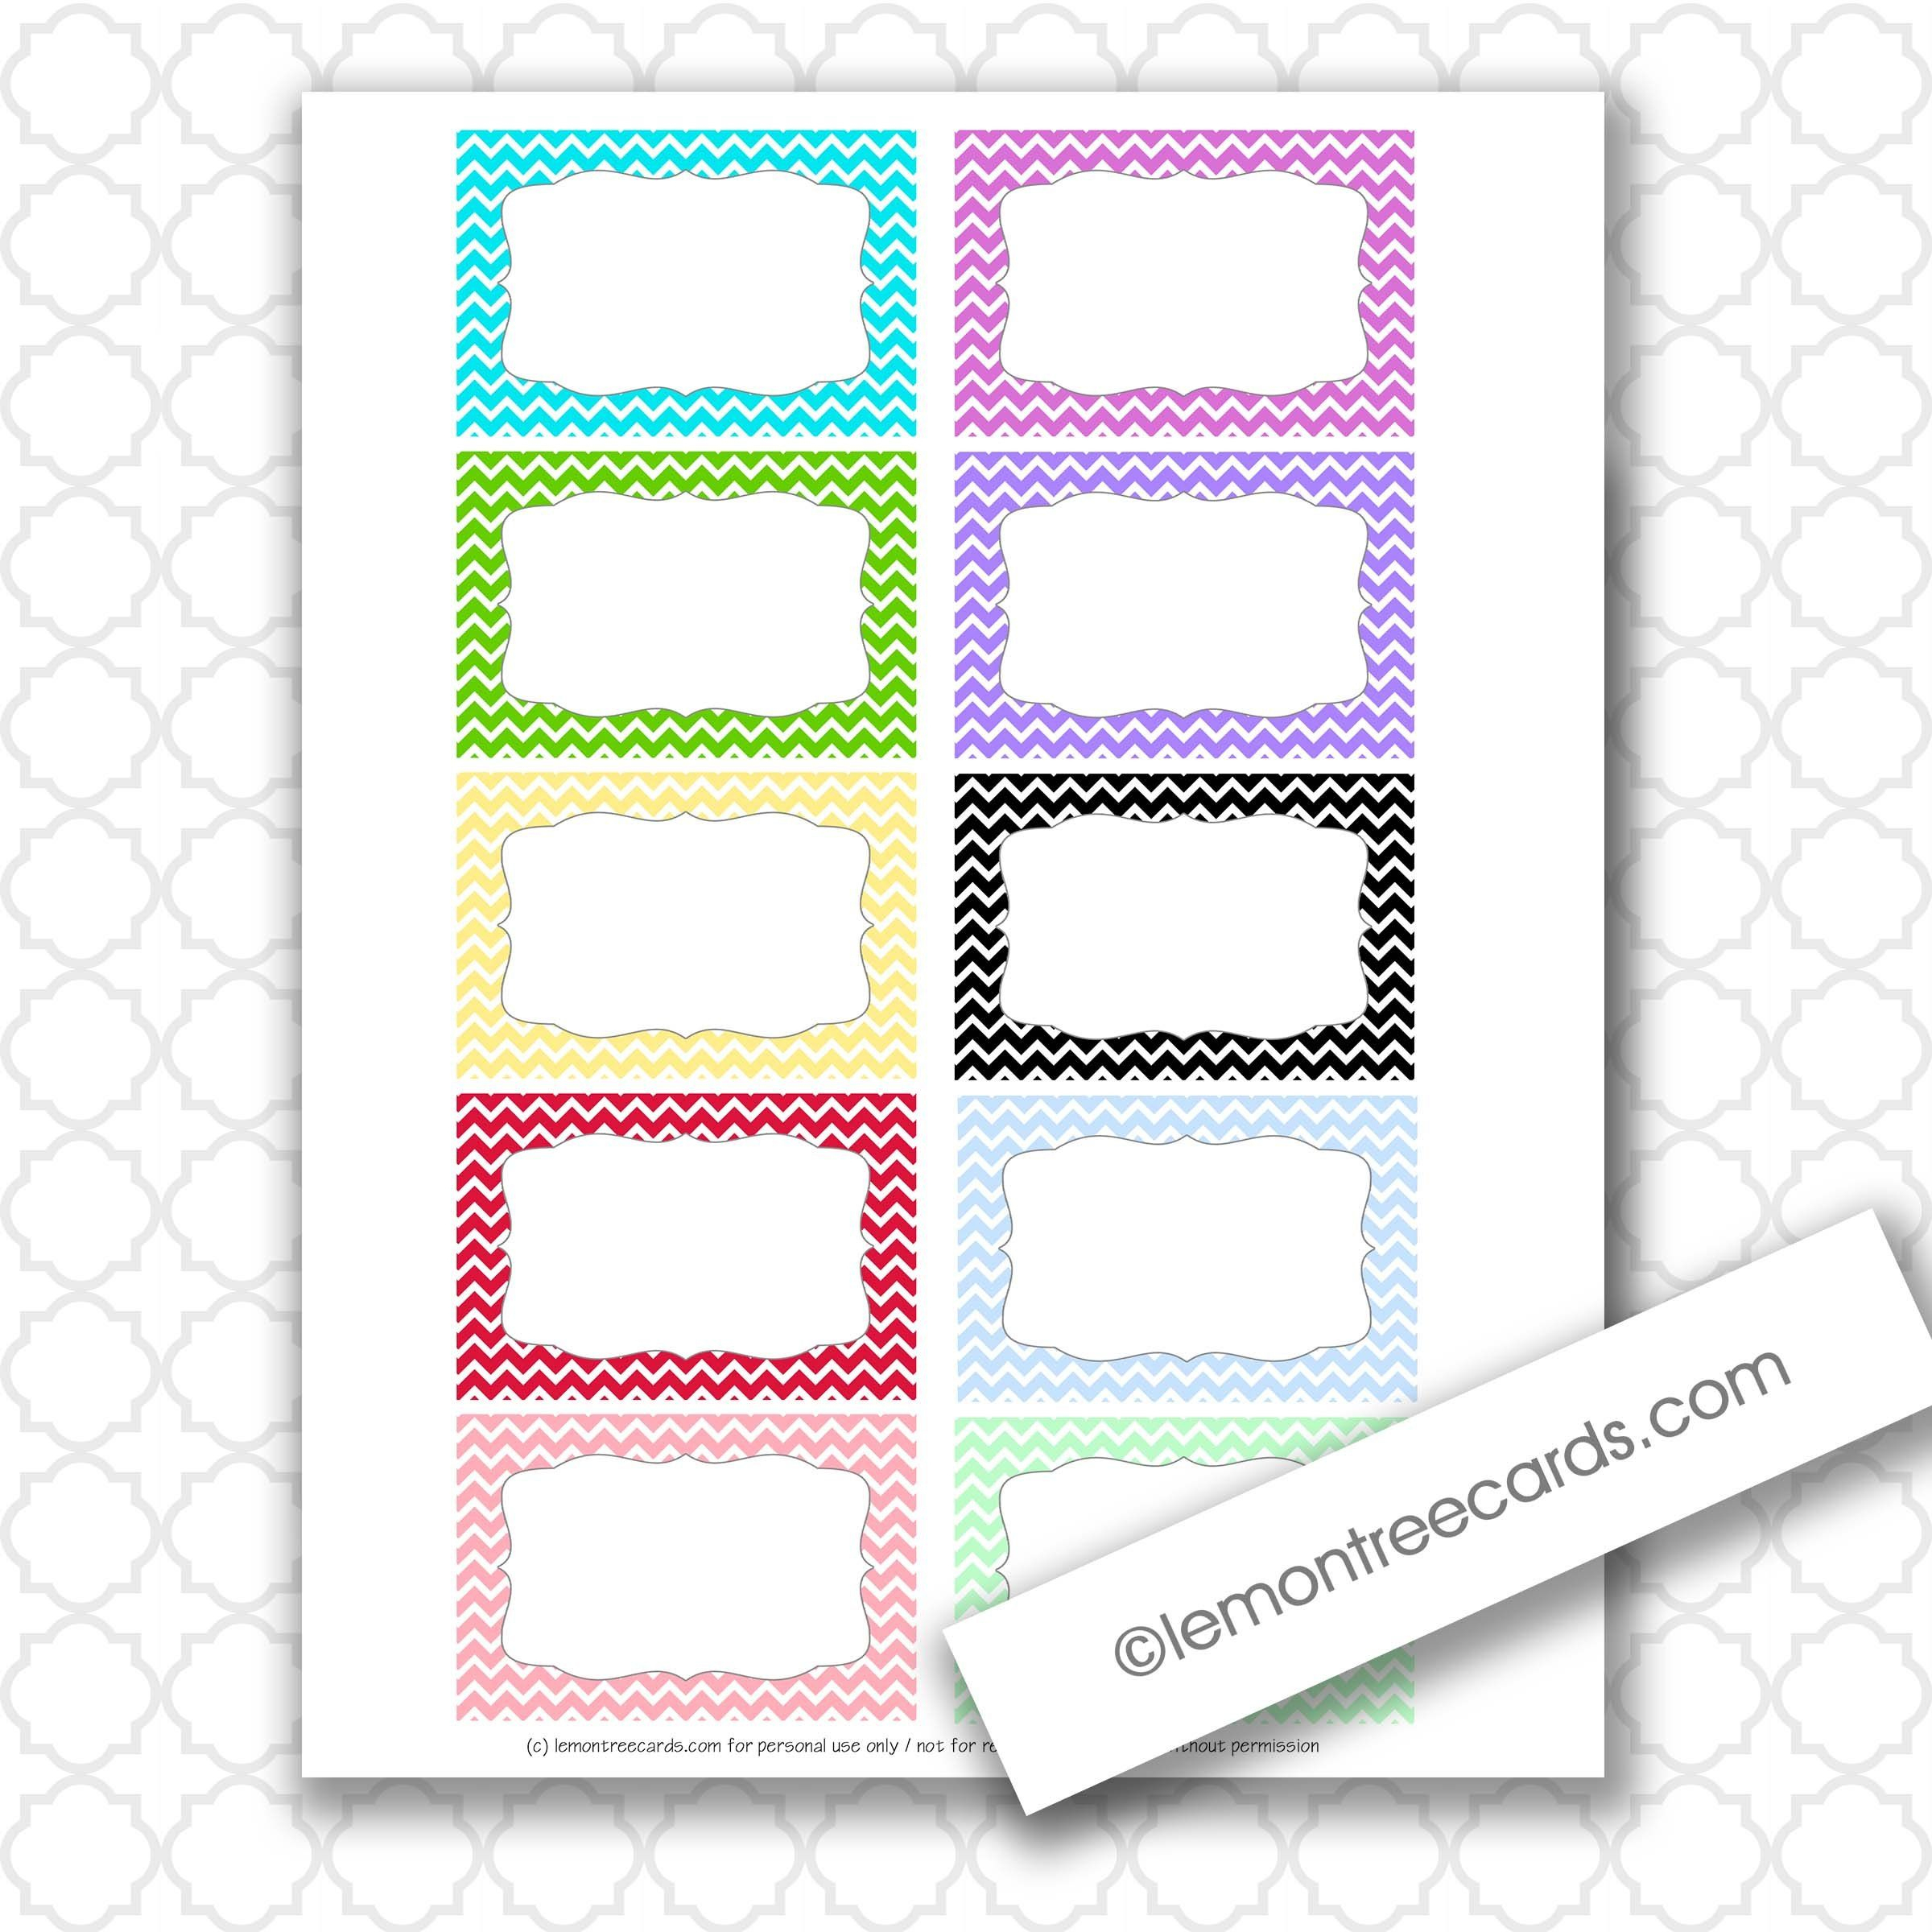 Image Result For Cute Free Index Card Template | Organization - Free Printable Blank Index Cards